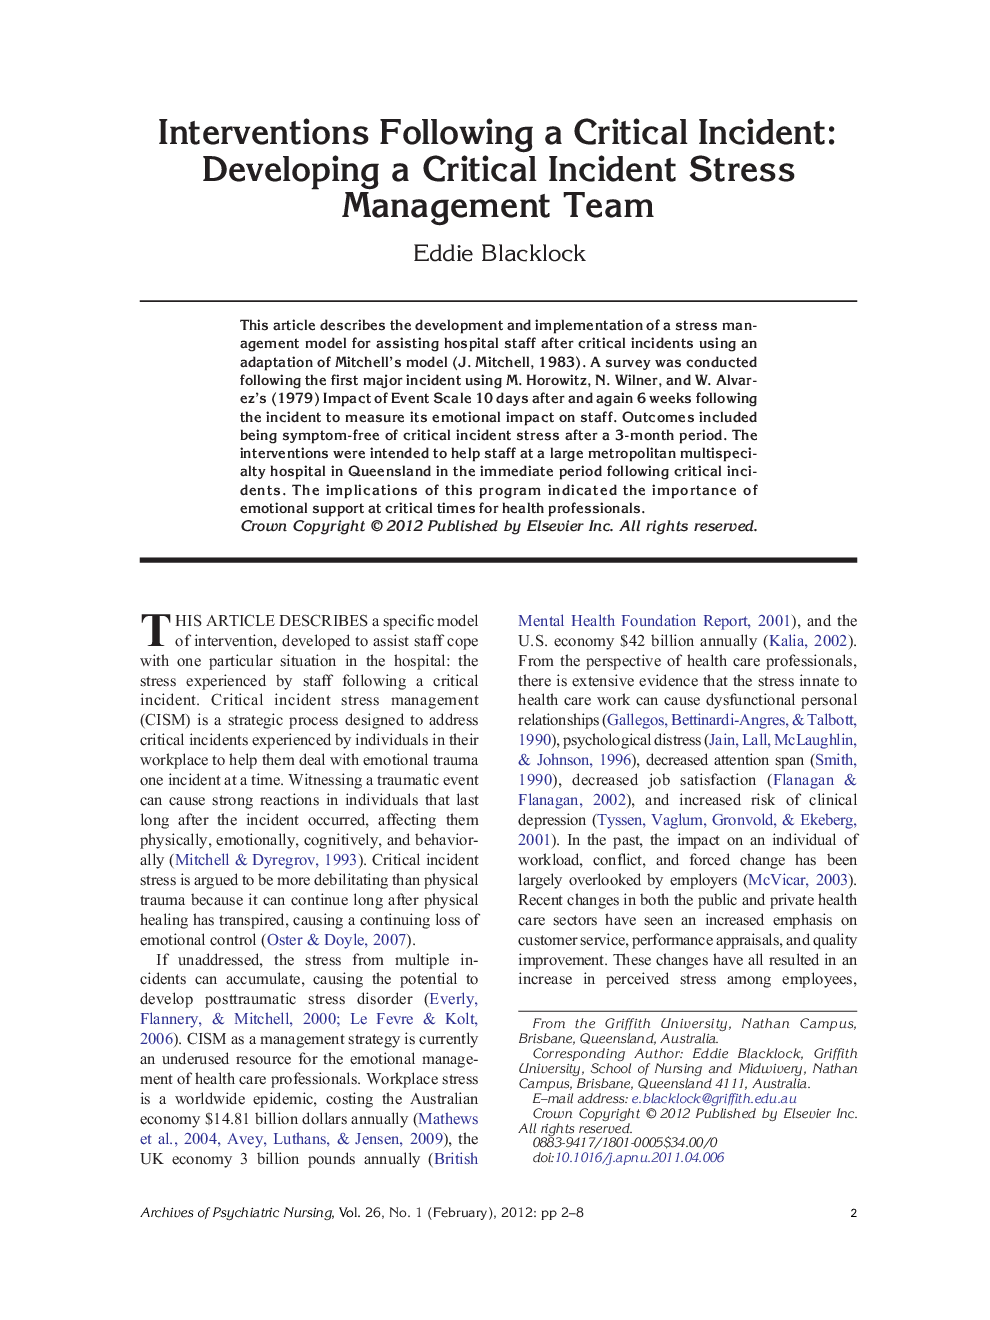 Interventions Following a Critical Incident: Developing a Critical Incident Stress Management Team